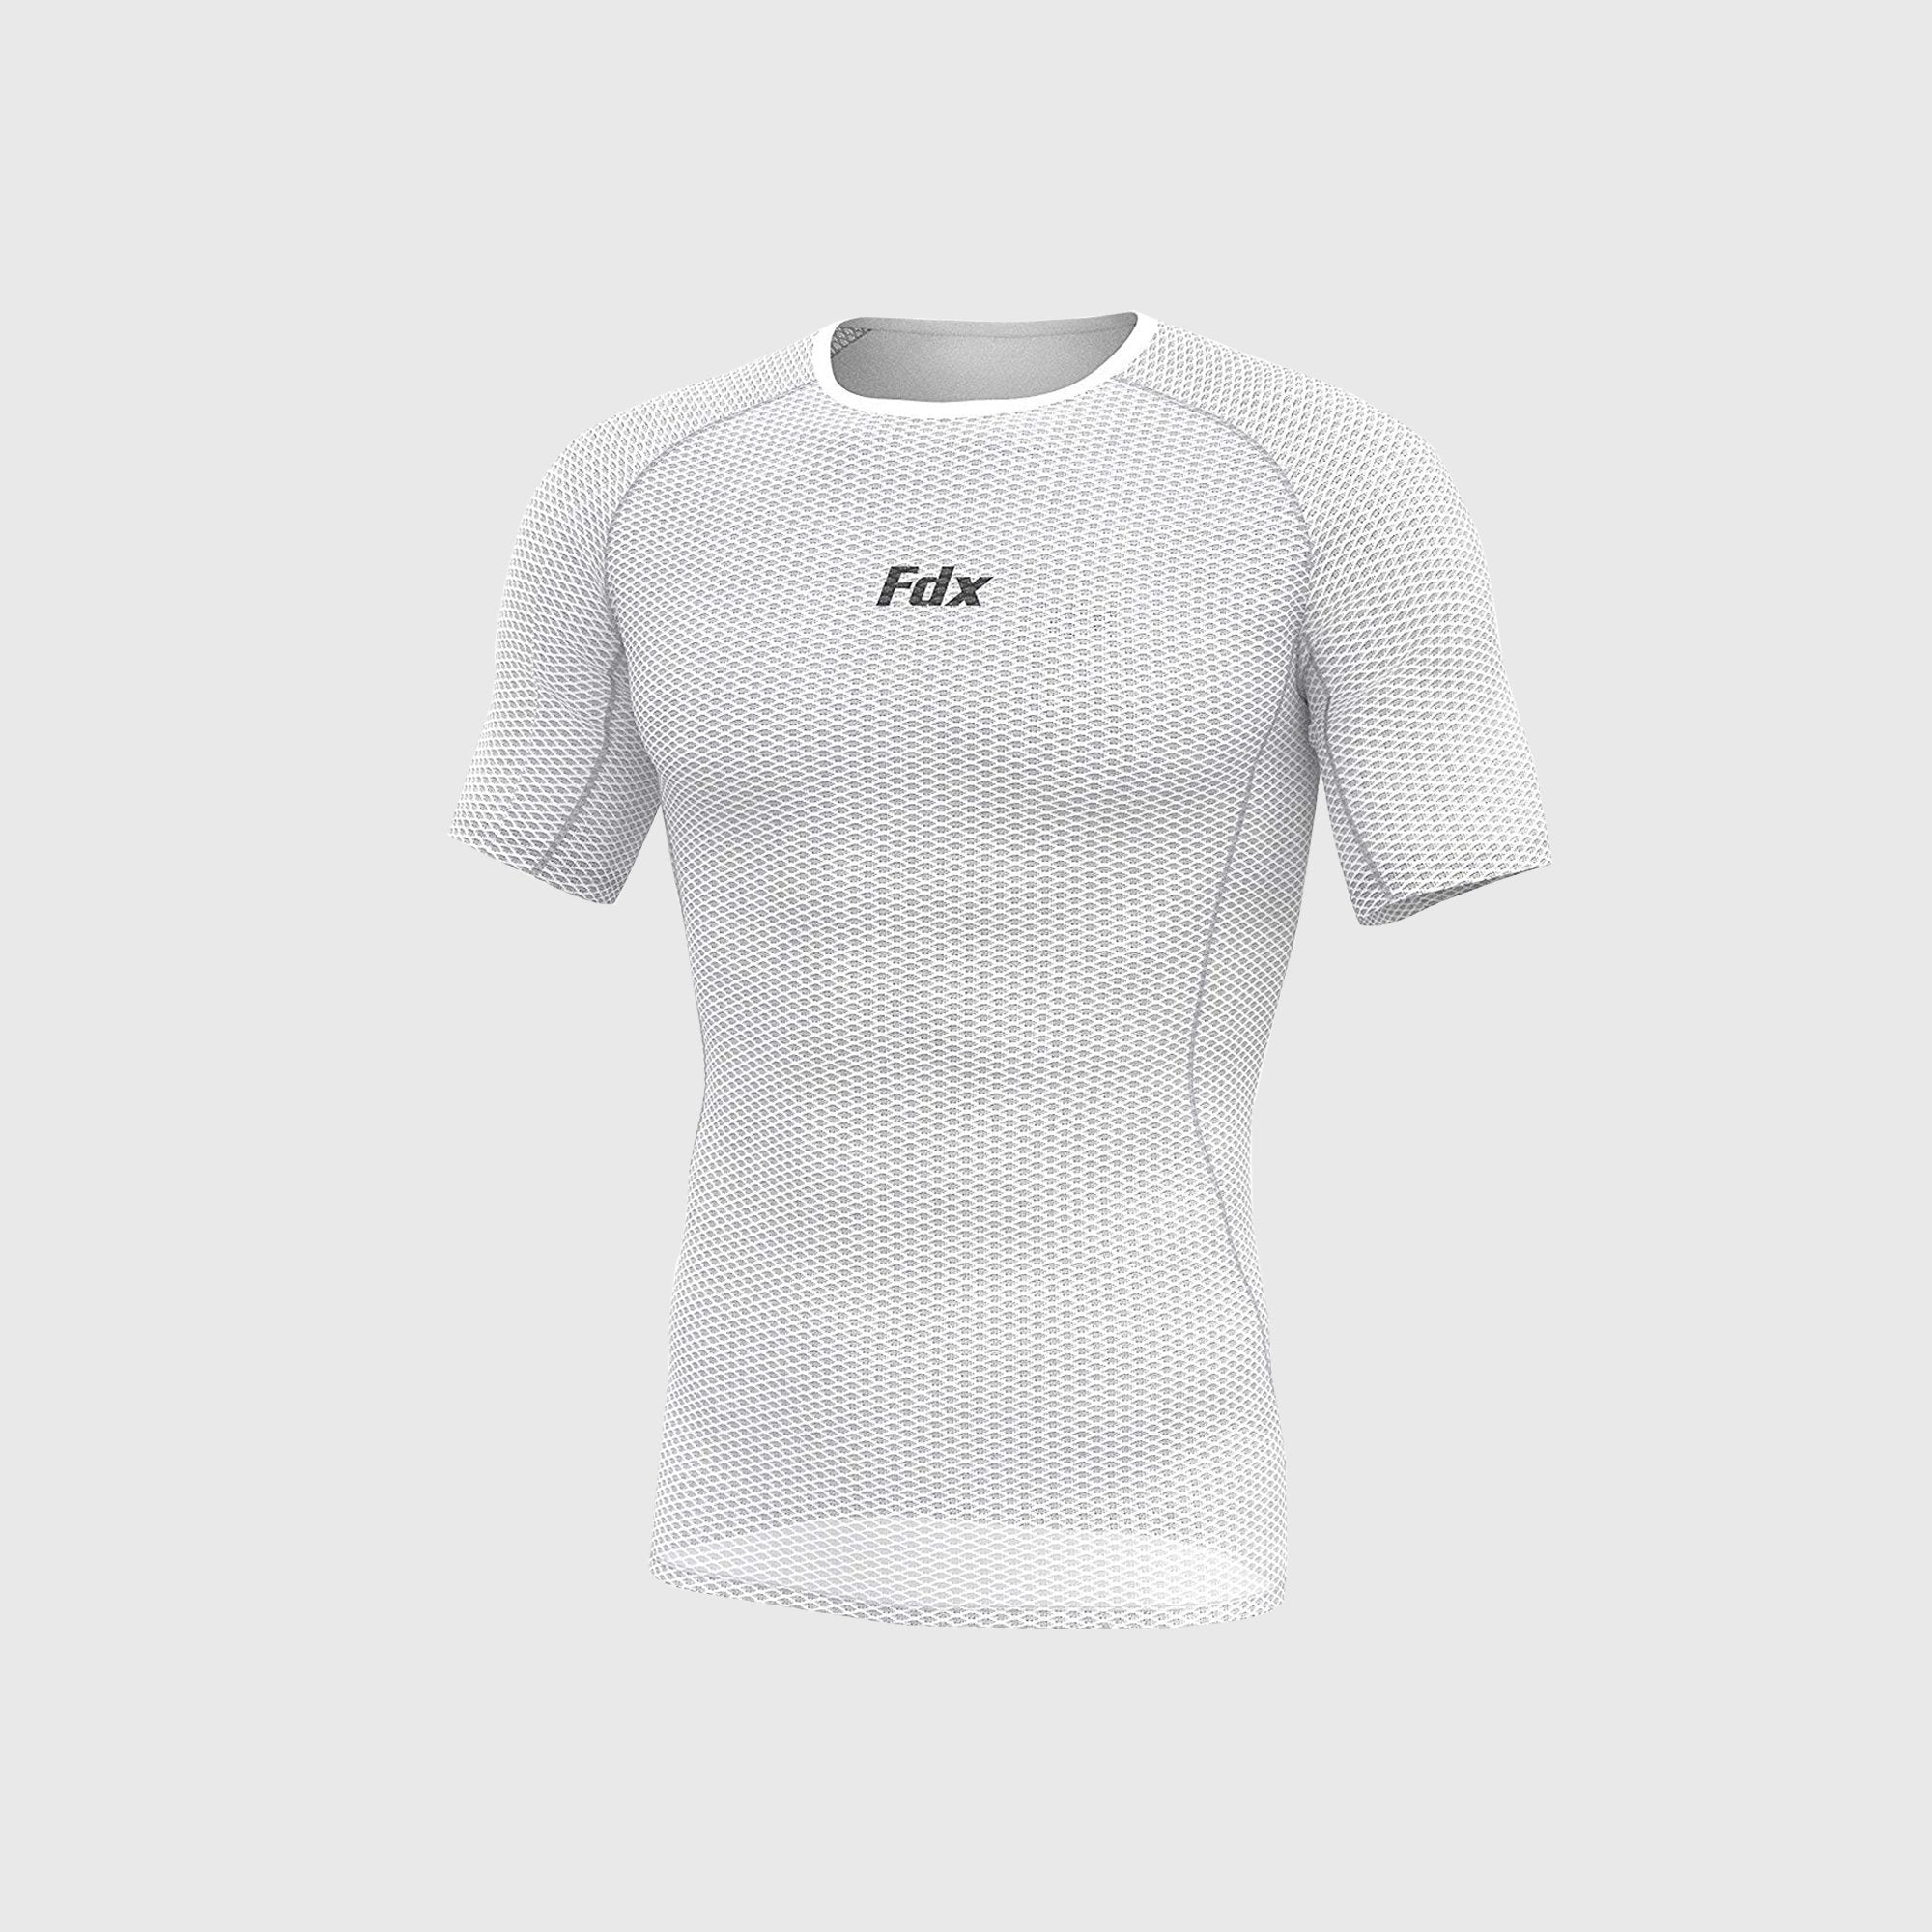 Fdx Men's Best White Short Sleeve Mesh Compression Top Running Gym Workout Wear Rash Guard Stretchable Breathable - Aeroform